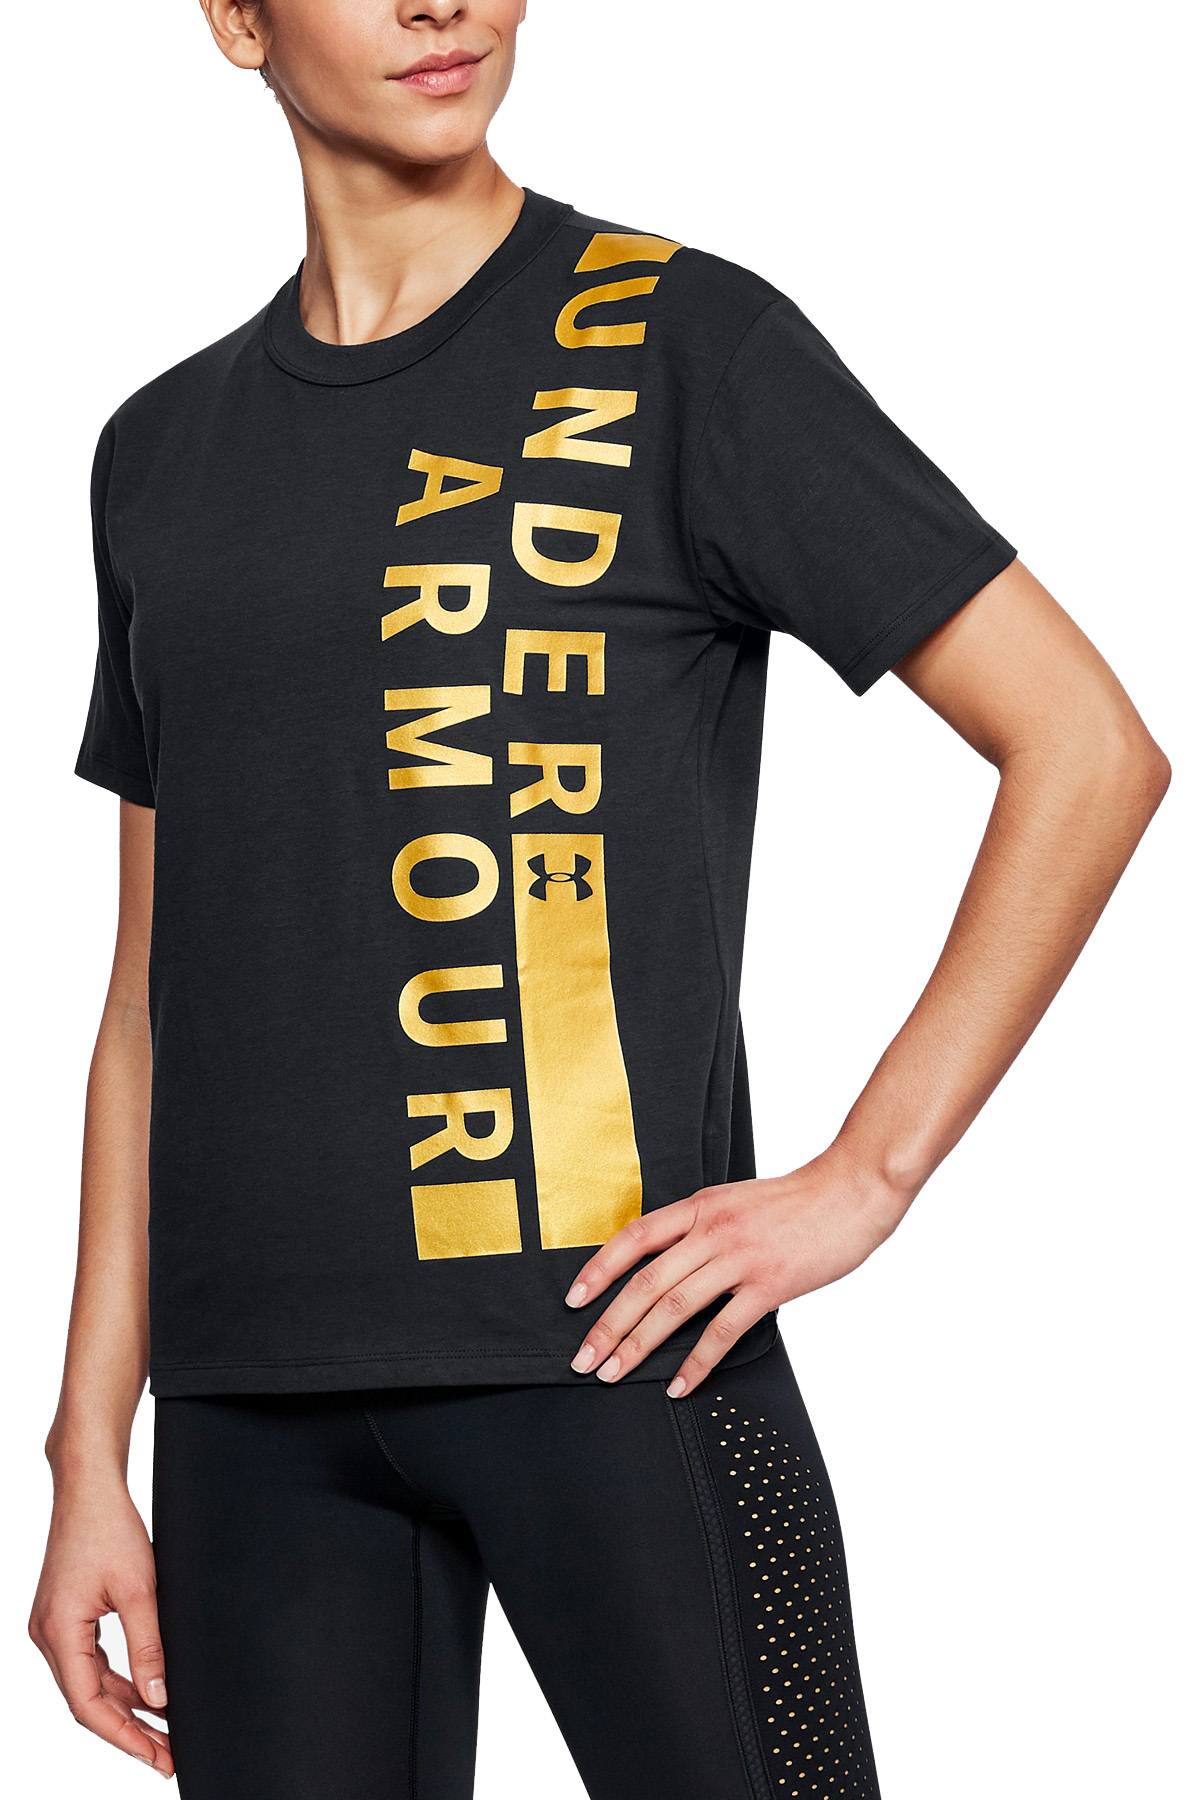 Under Armour Black/Gold Metallic Charged Cotton Girlfriend Tee